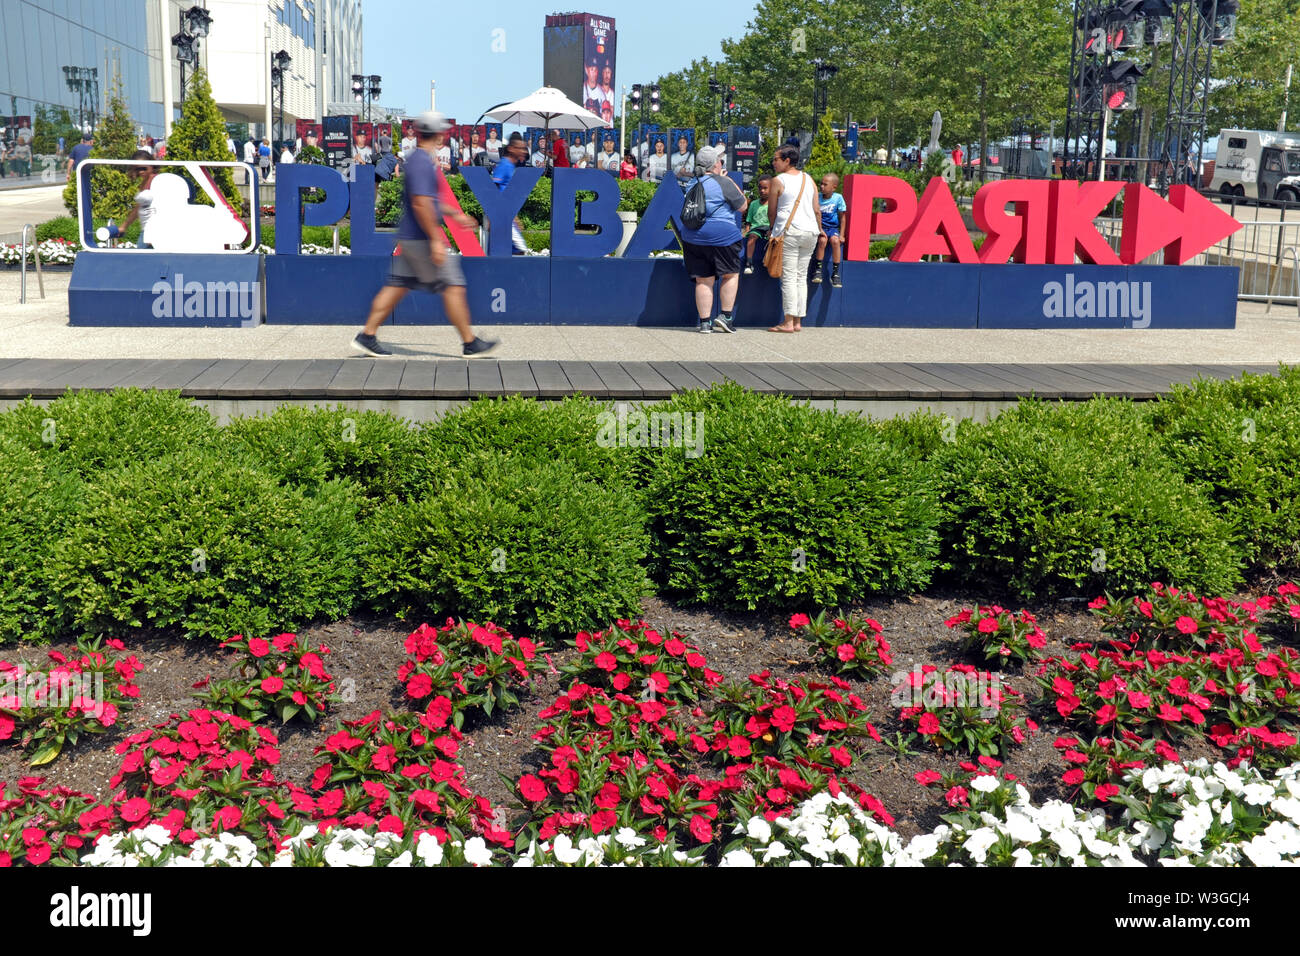 The Play Ballpark was part of the MLB All-Star festivities in downtown Cleveland, Ohio, USA leading up to the July 9, 2019 All-Star Game. Stock Photo